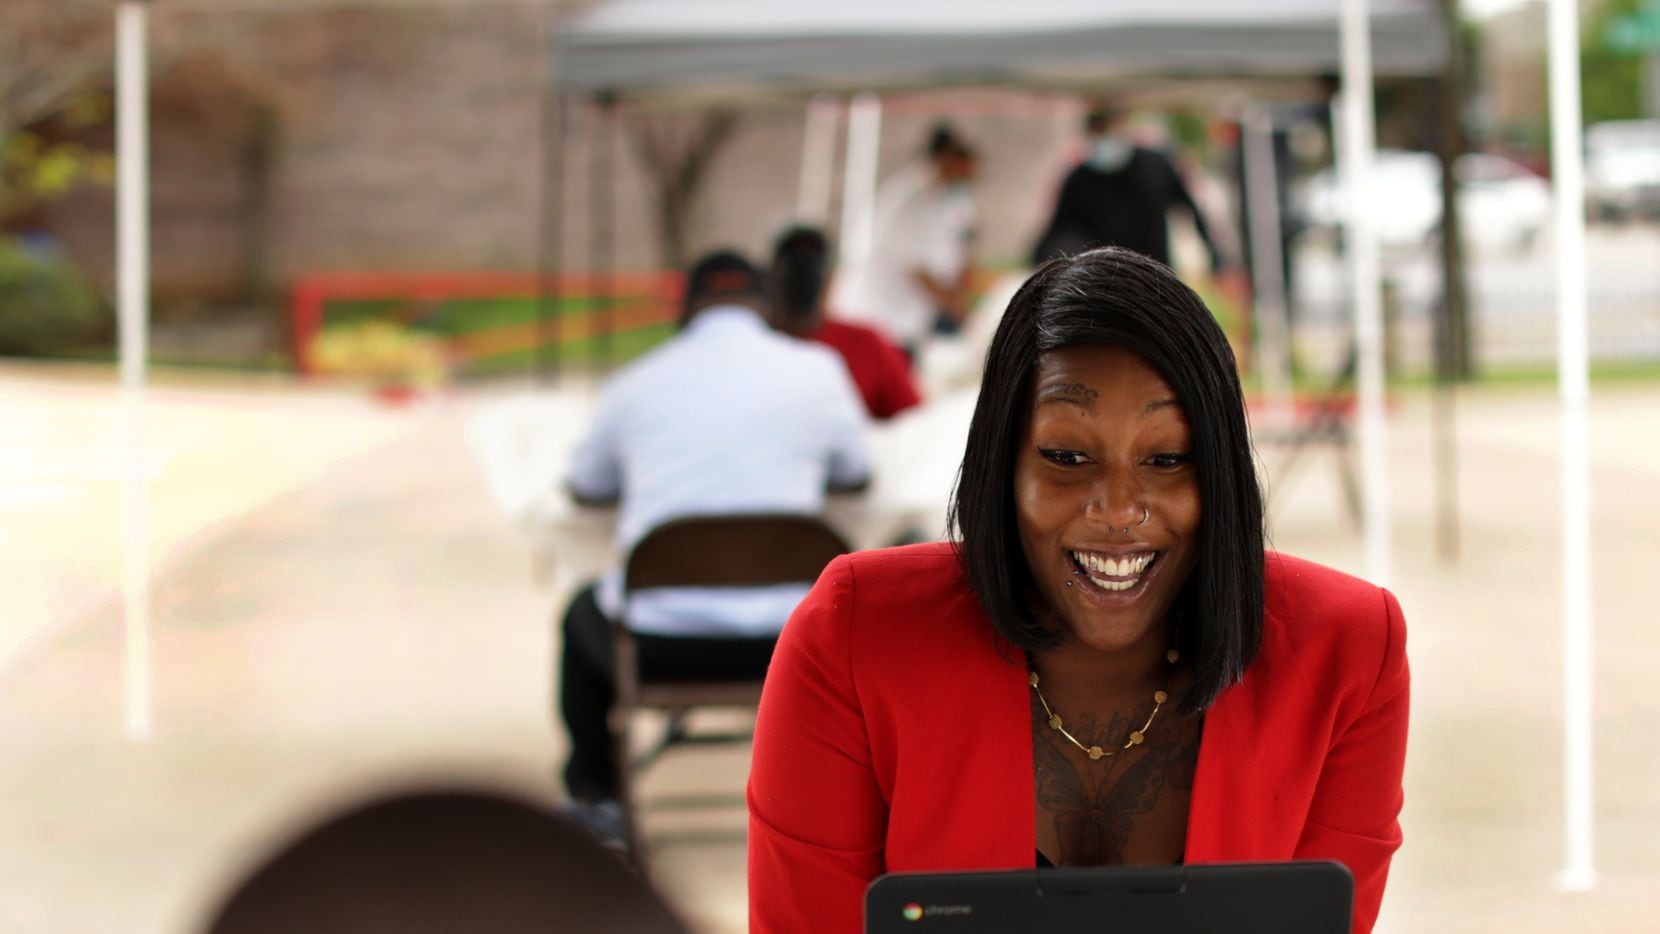 Shaterica Asberry attends a job fair at the T.R. Hoover Multipurpose Center in Dallas, TX,...